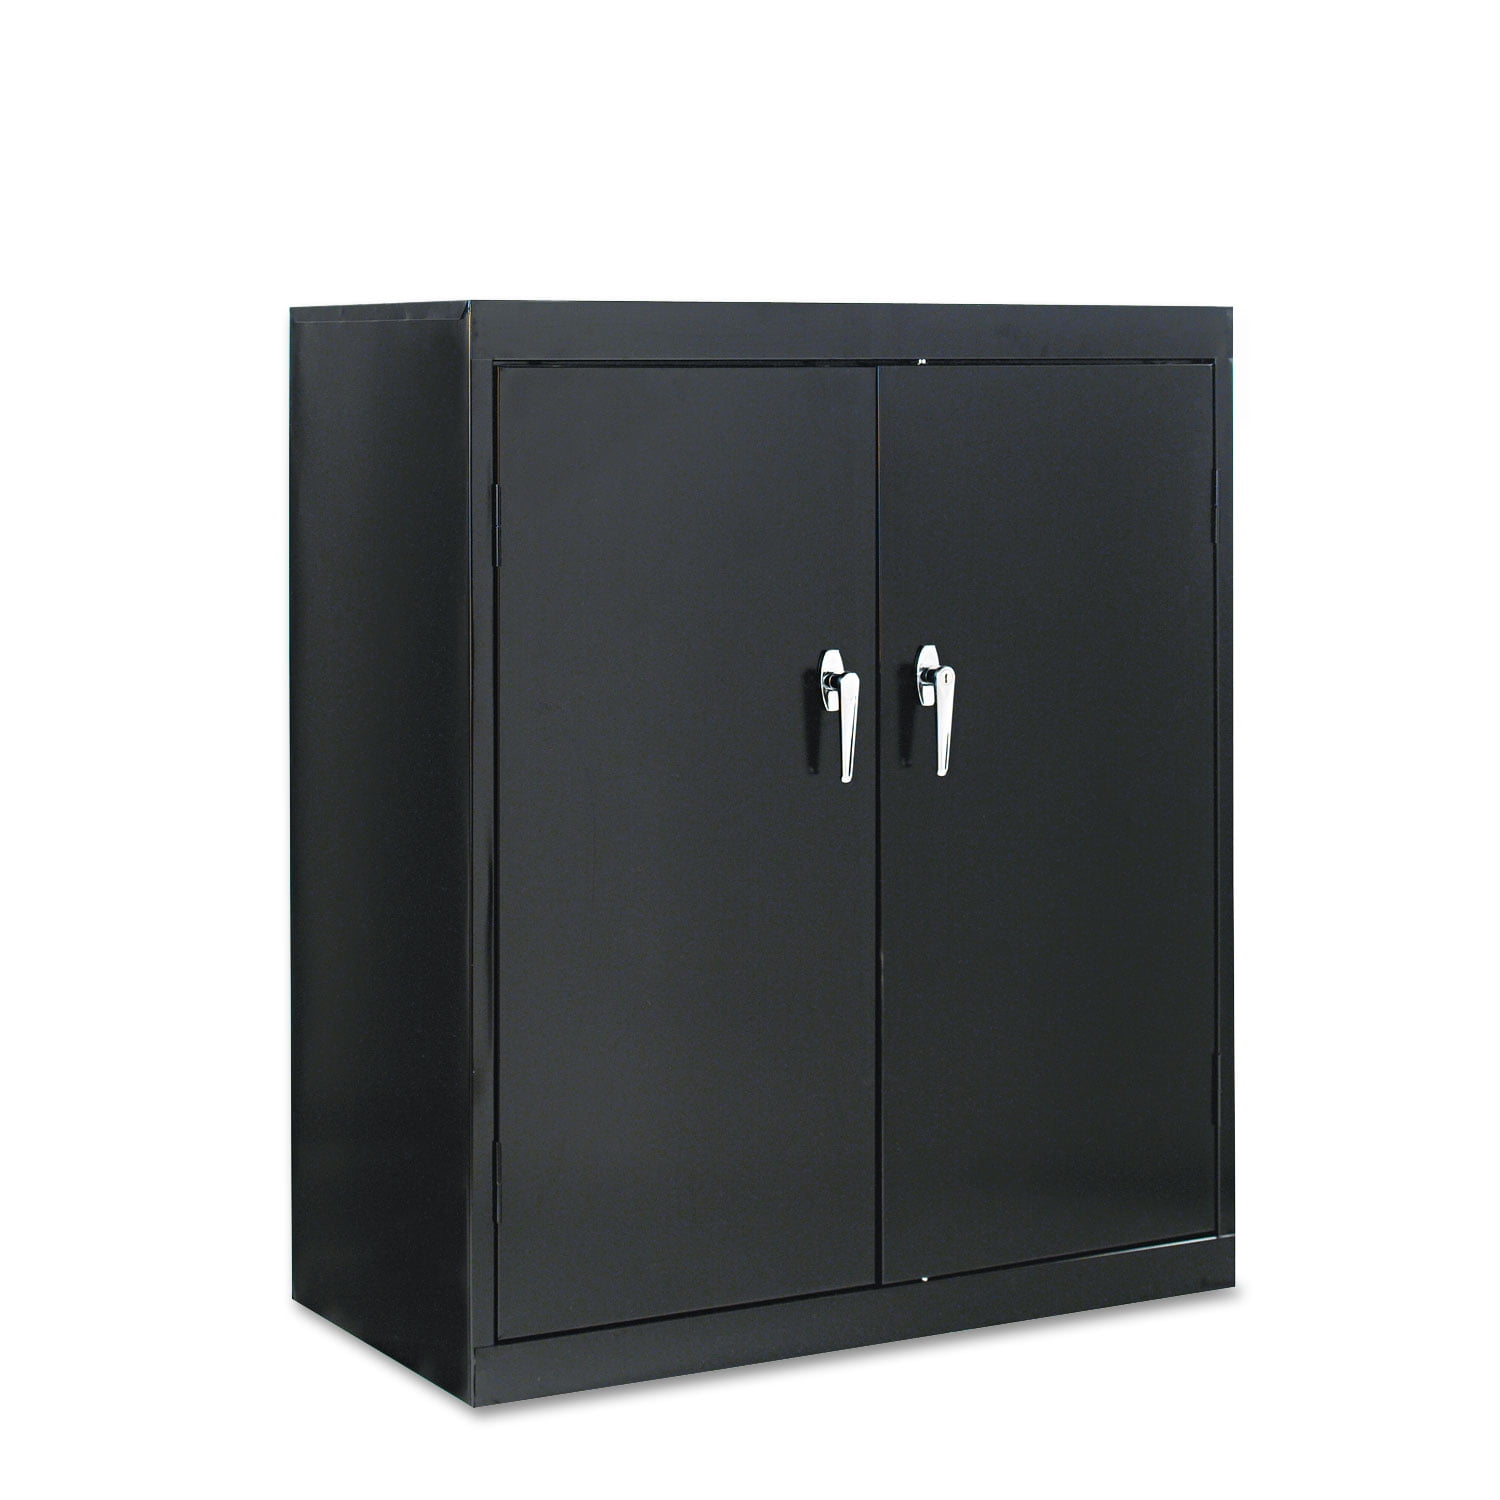 Details about   Adjustable Outdoor Garden Storage Cabinet with 3 Shelves Black and Gray Locker 